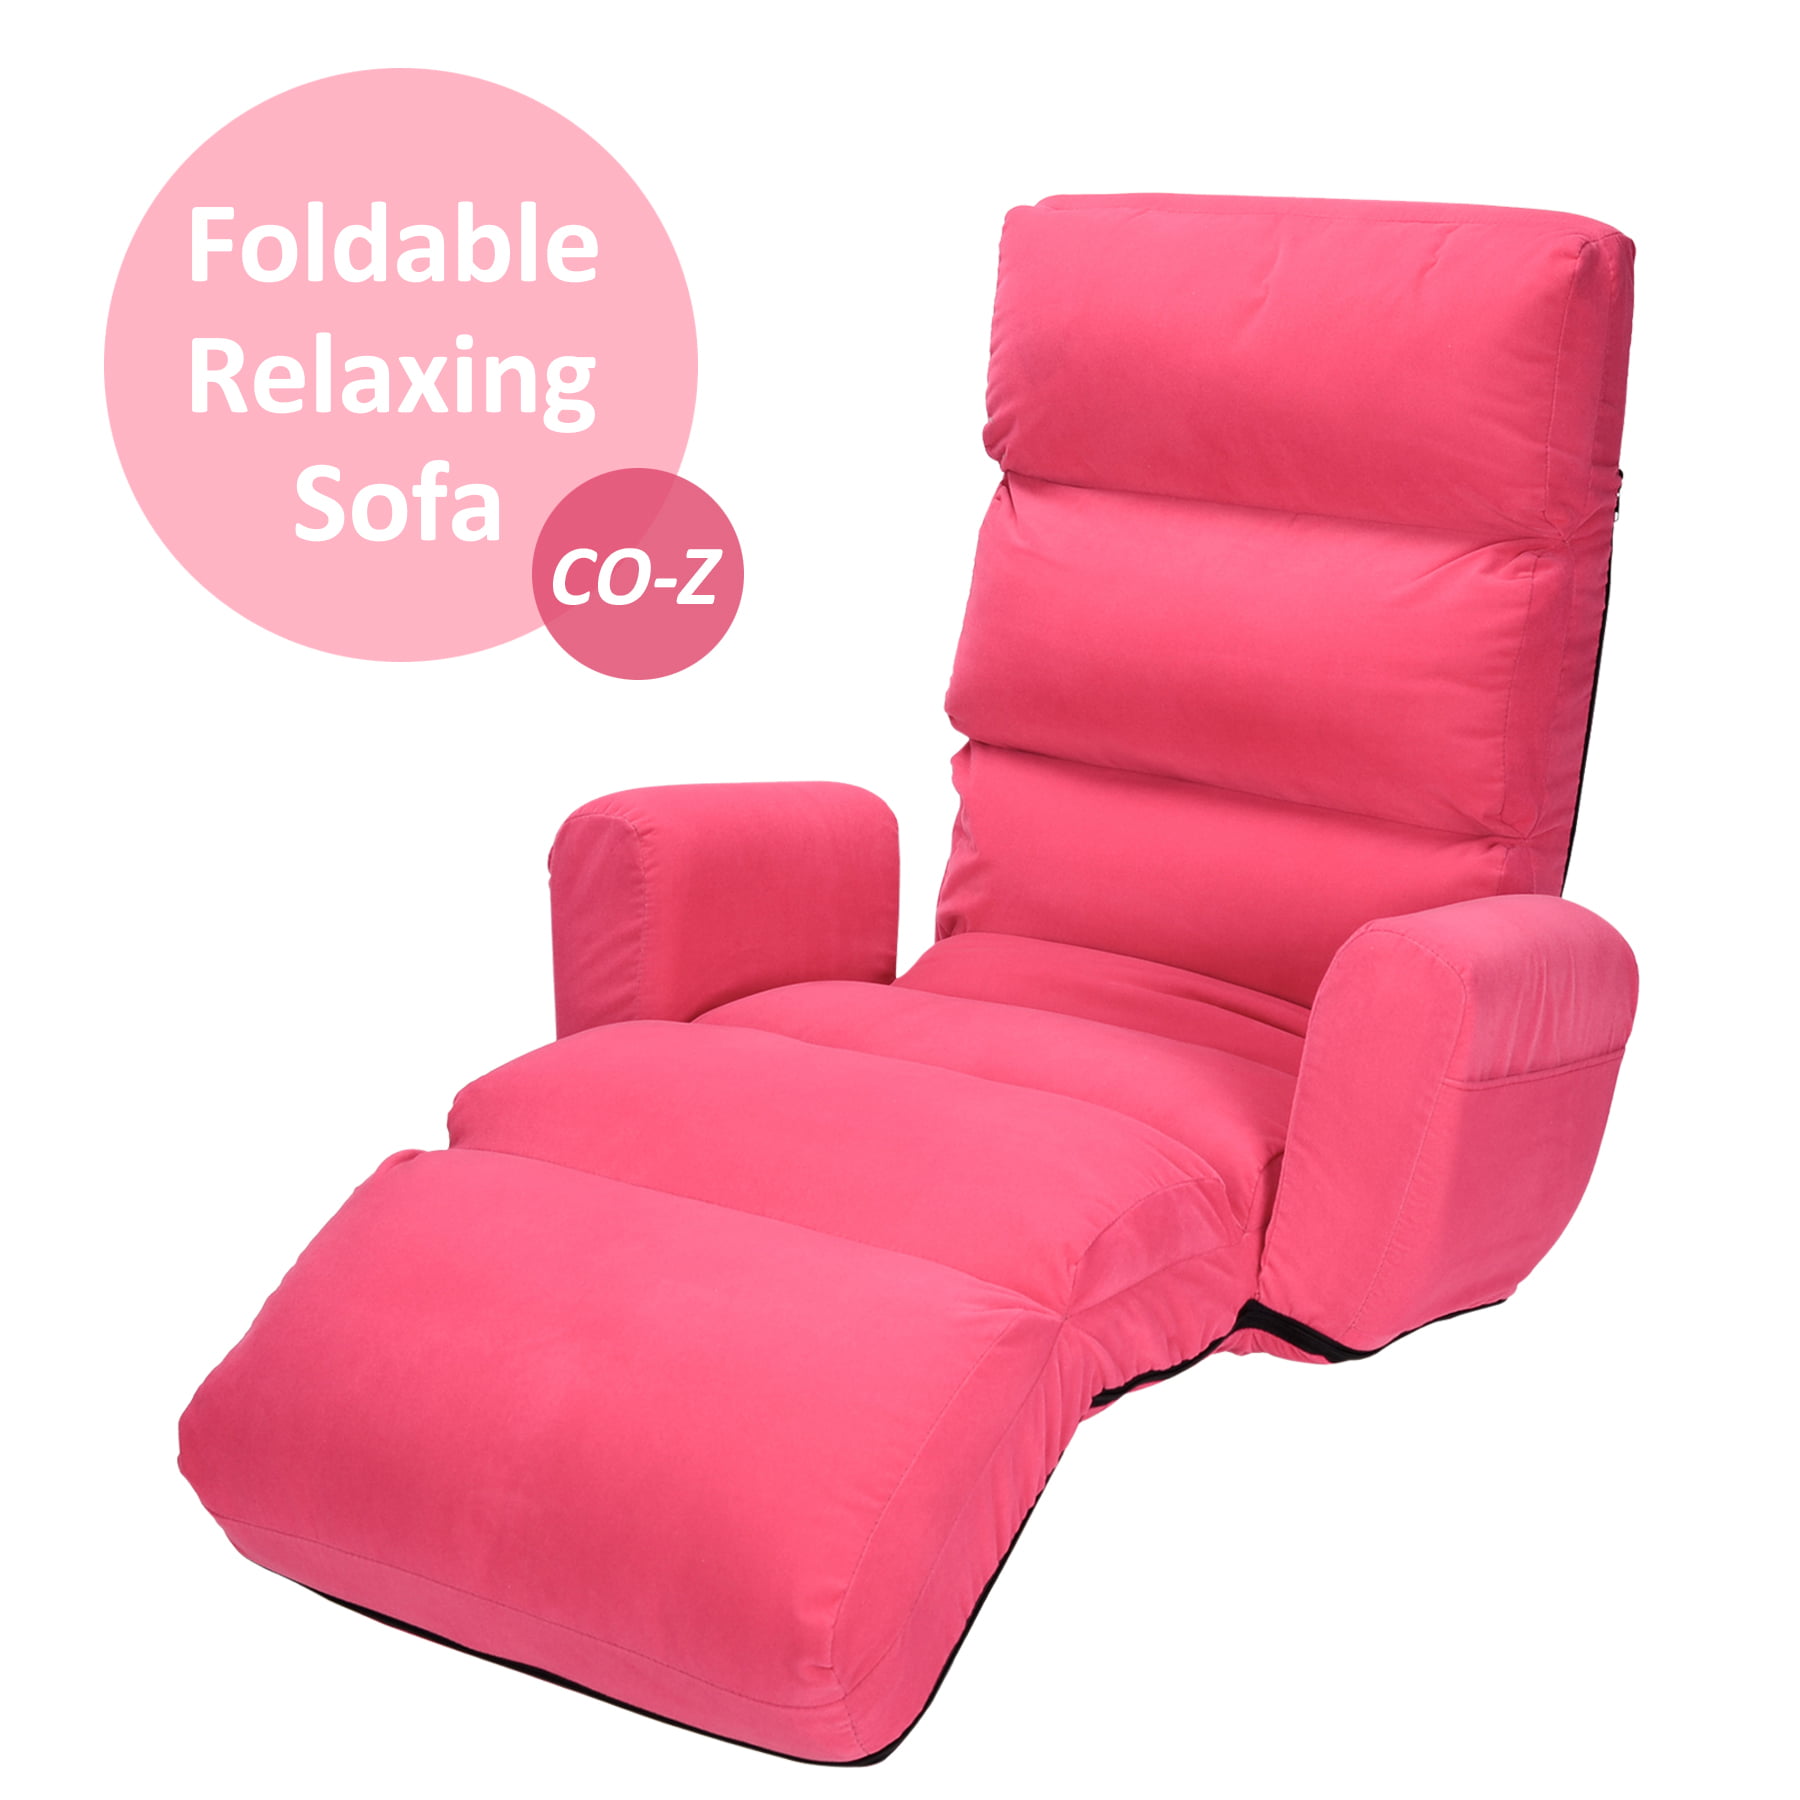 Folding Lazy Sofa Chair Stylish Sofa Couch Beds Lounge